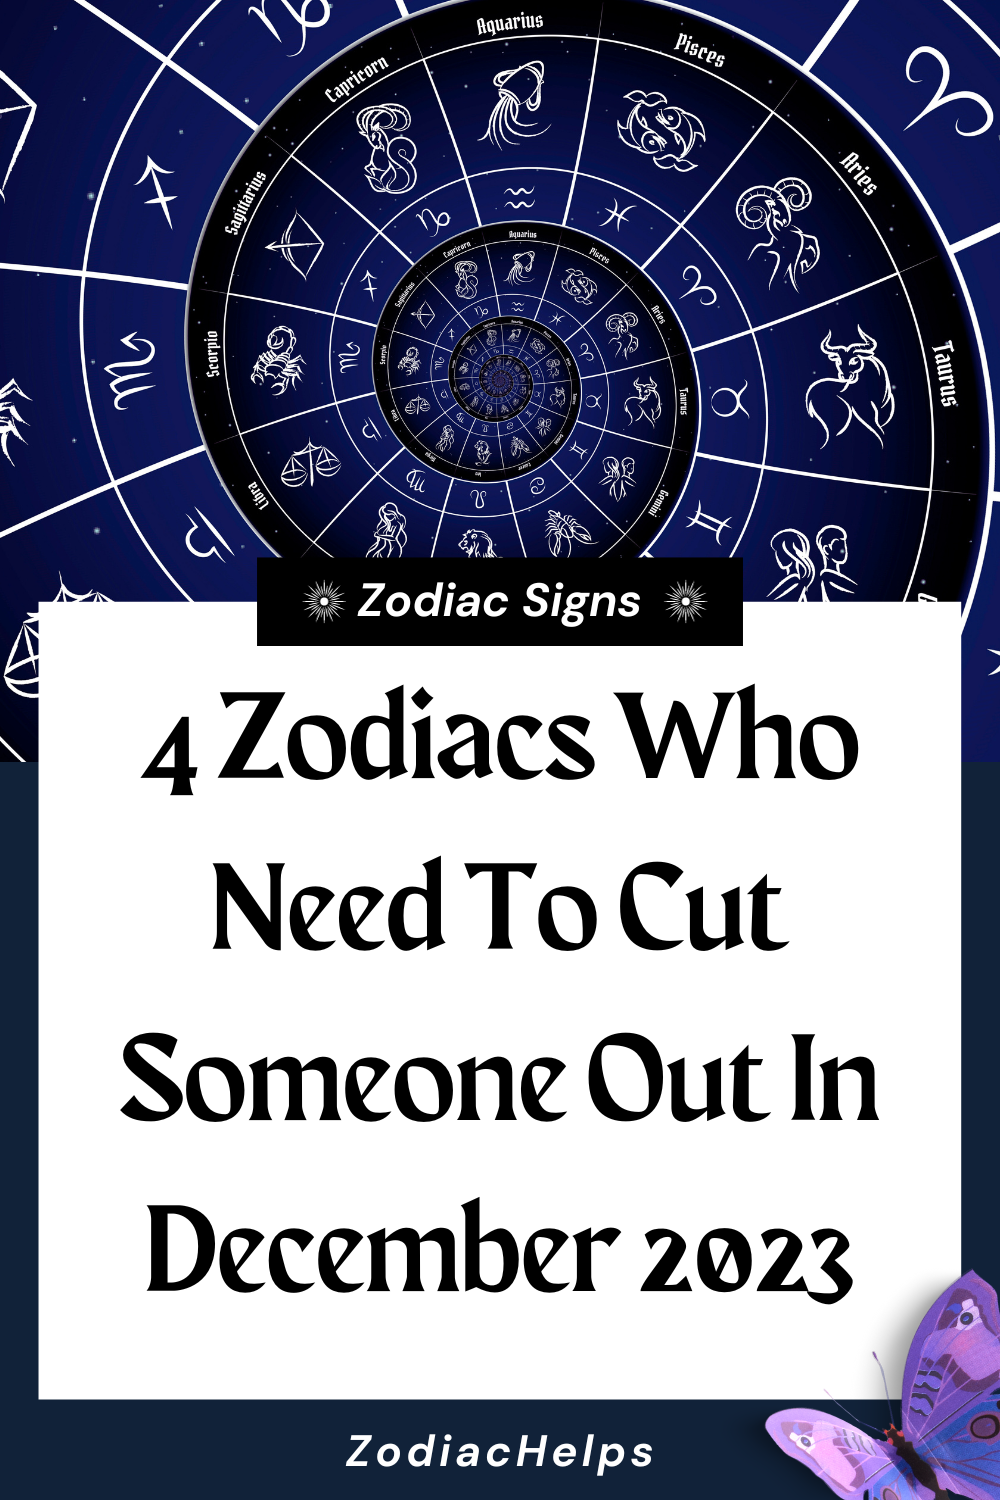 4 Zodiacs Who Need To Cut Someone Out In December 2023